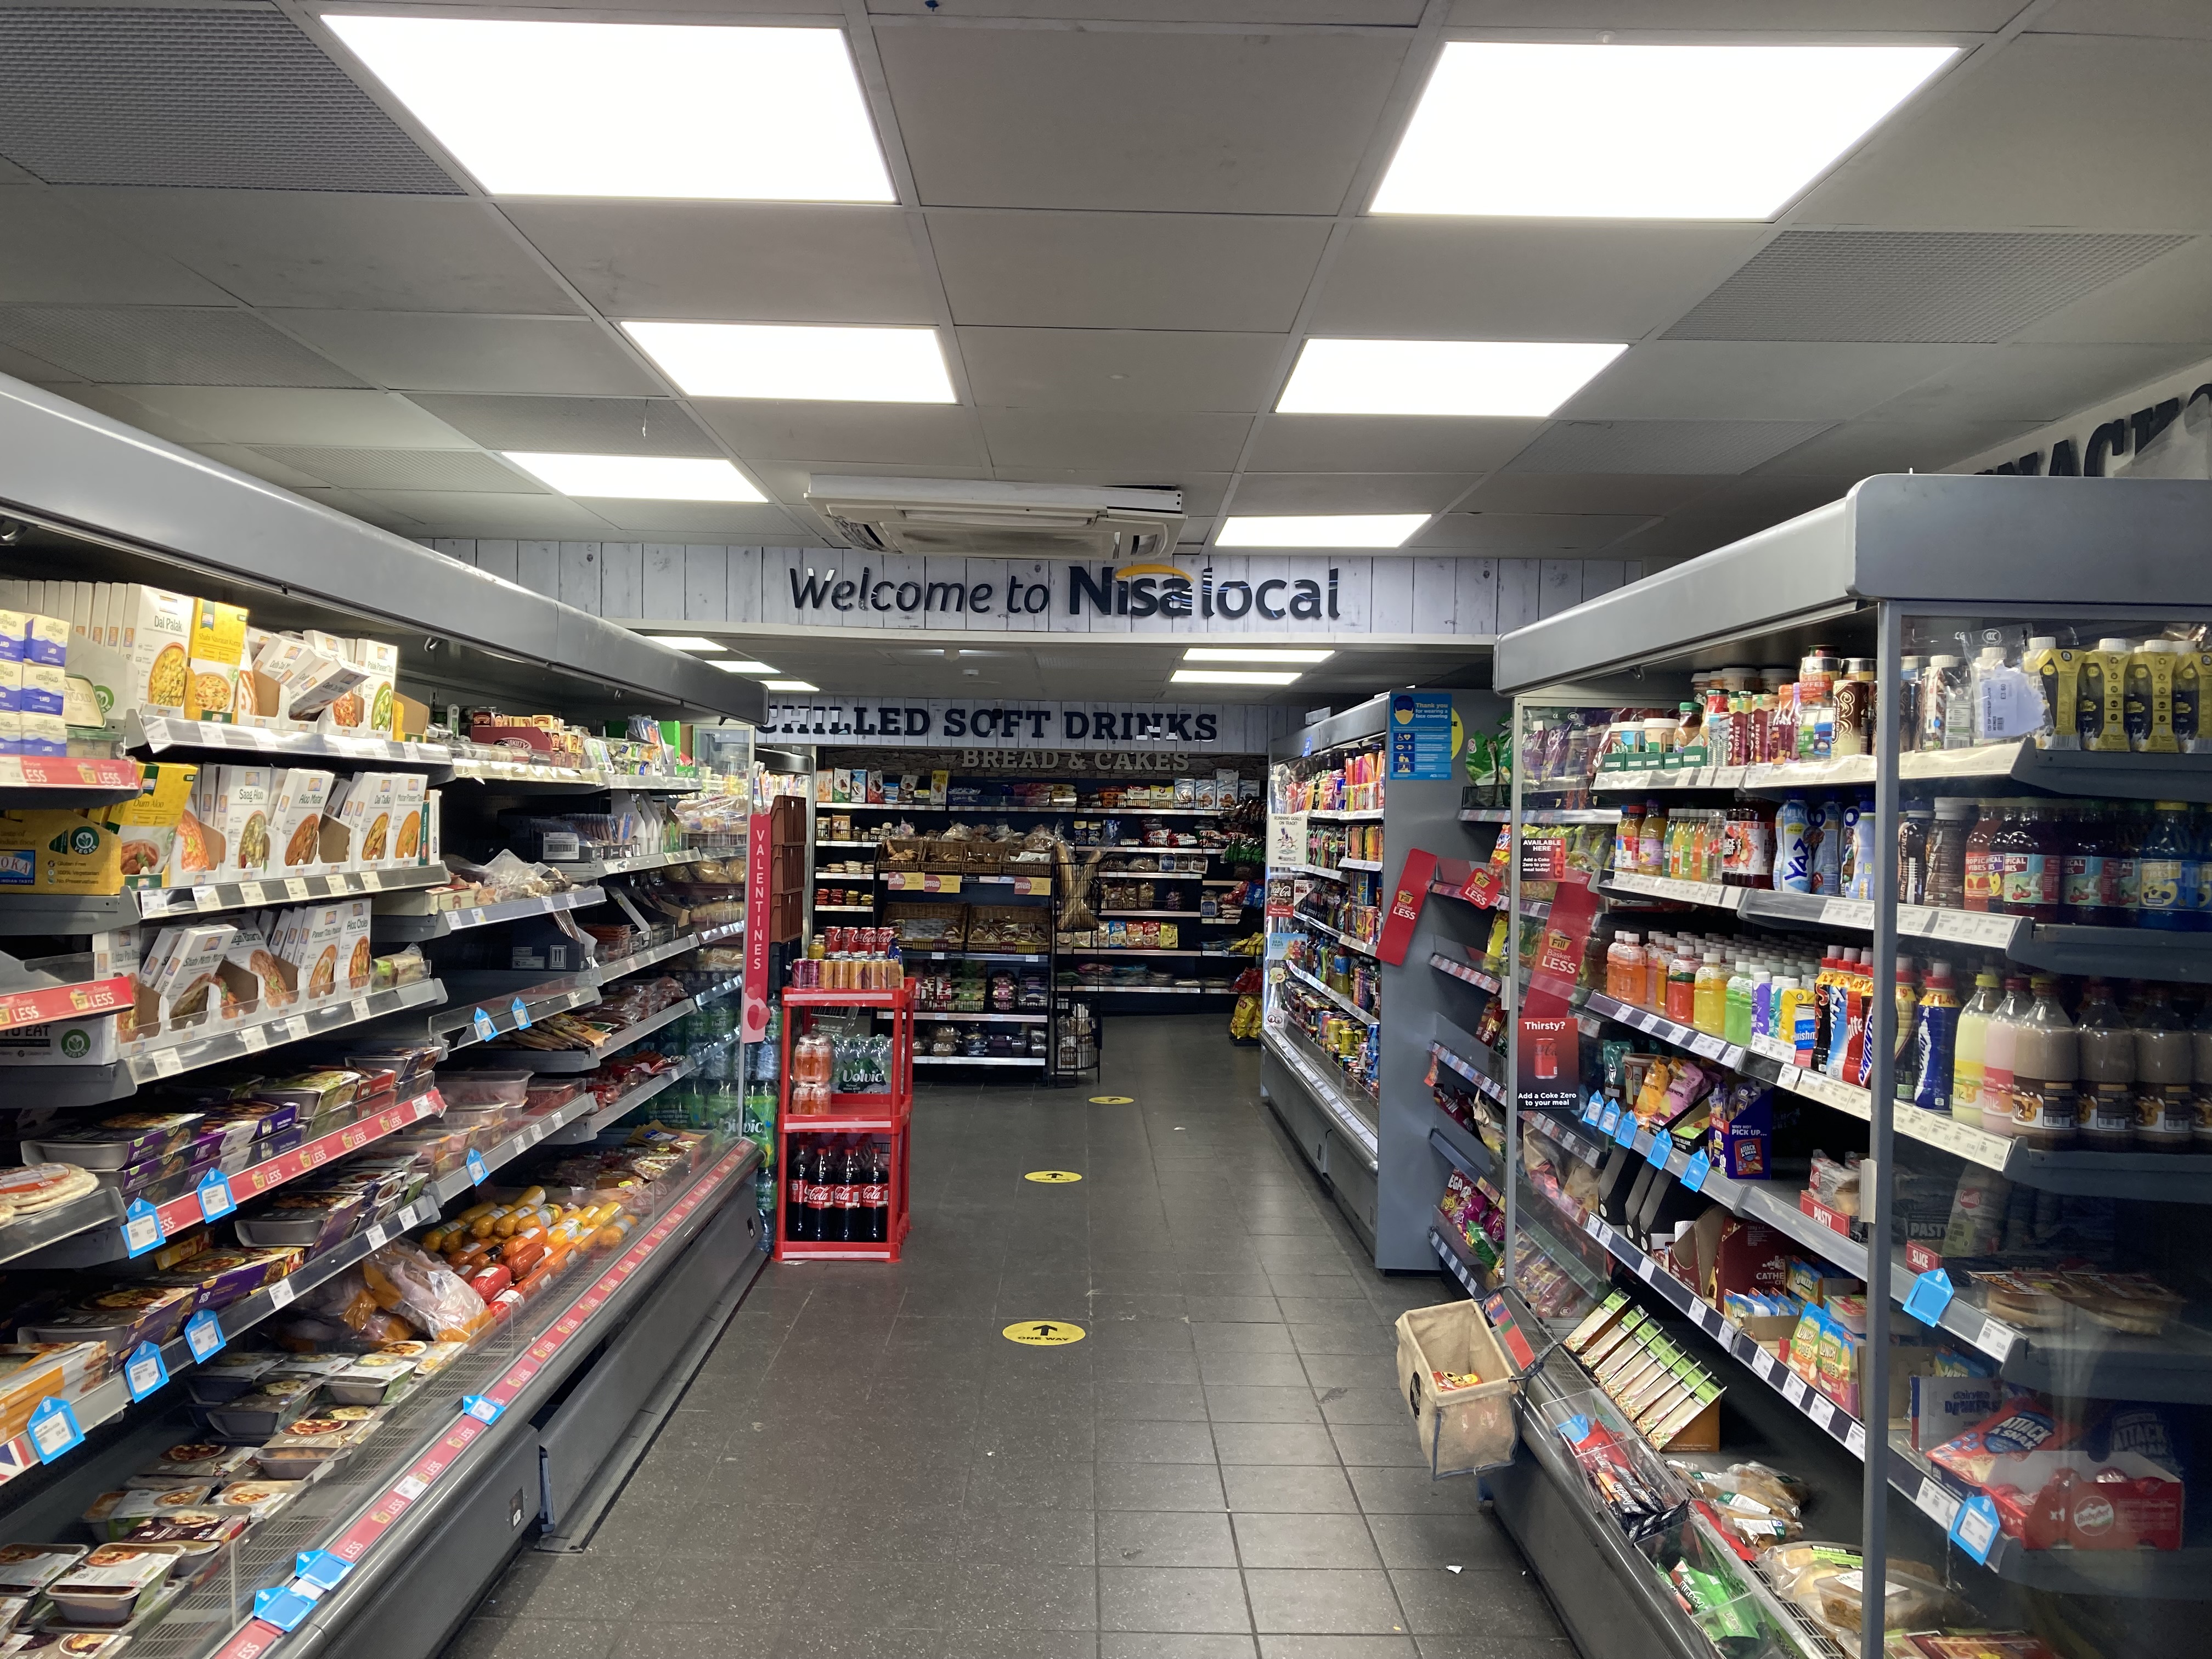 New London Nisa retailers invest in better value product ranges